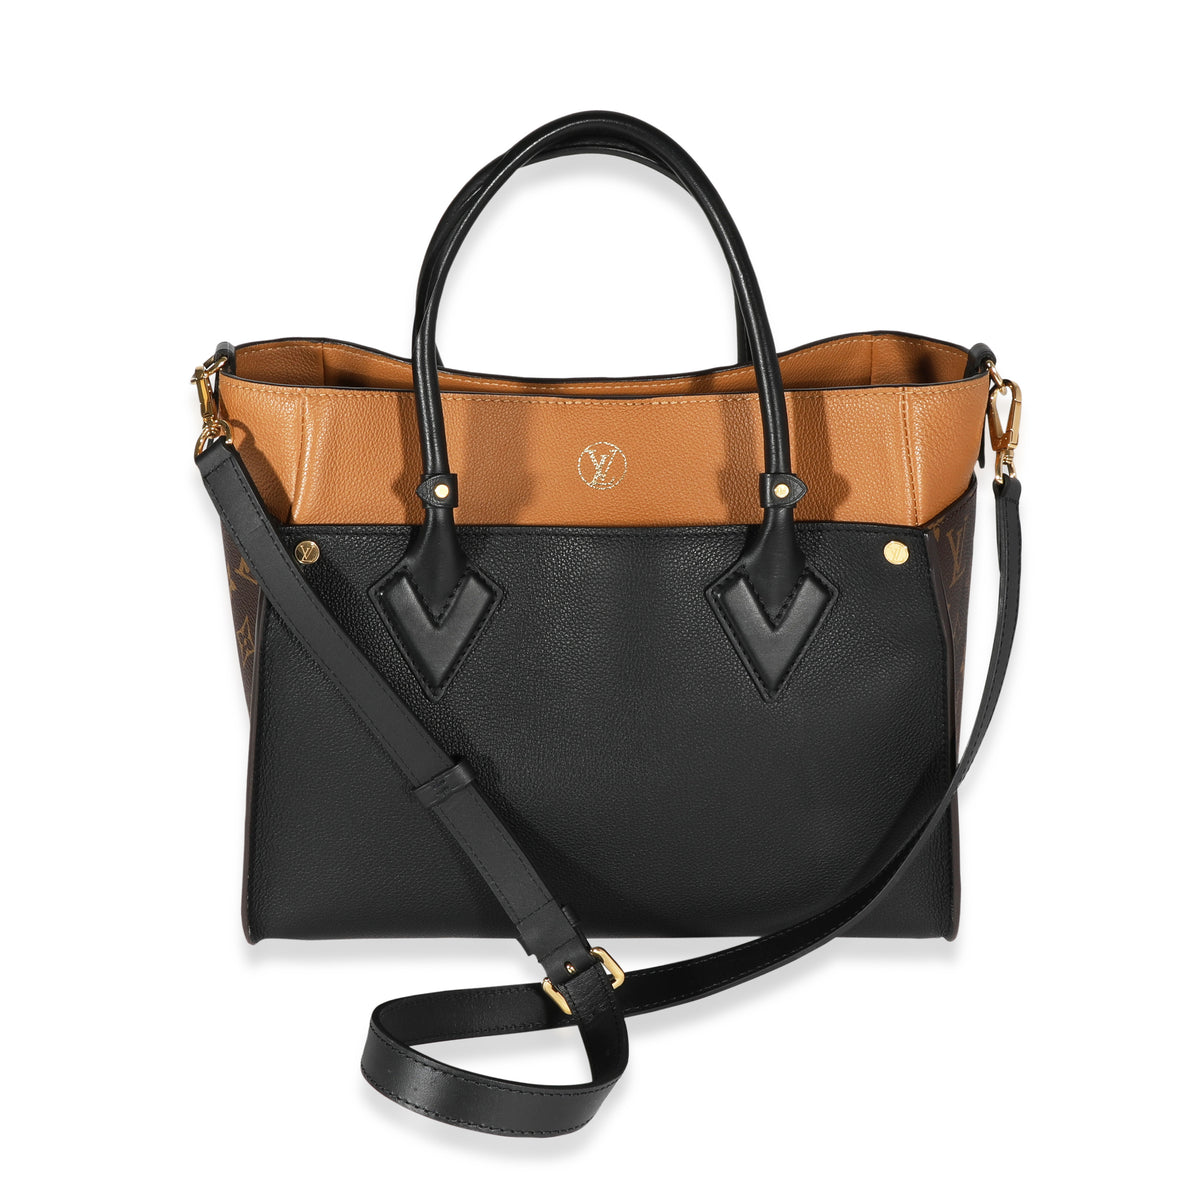 Louis Vuitton Monogram on My Side mm Tote Bag, Brown, One Size